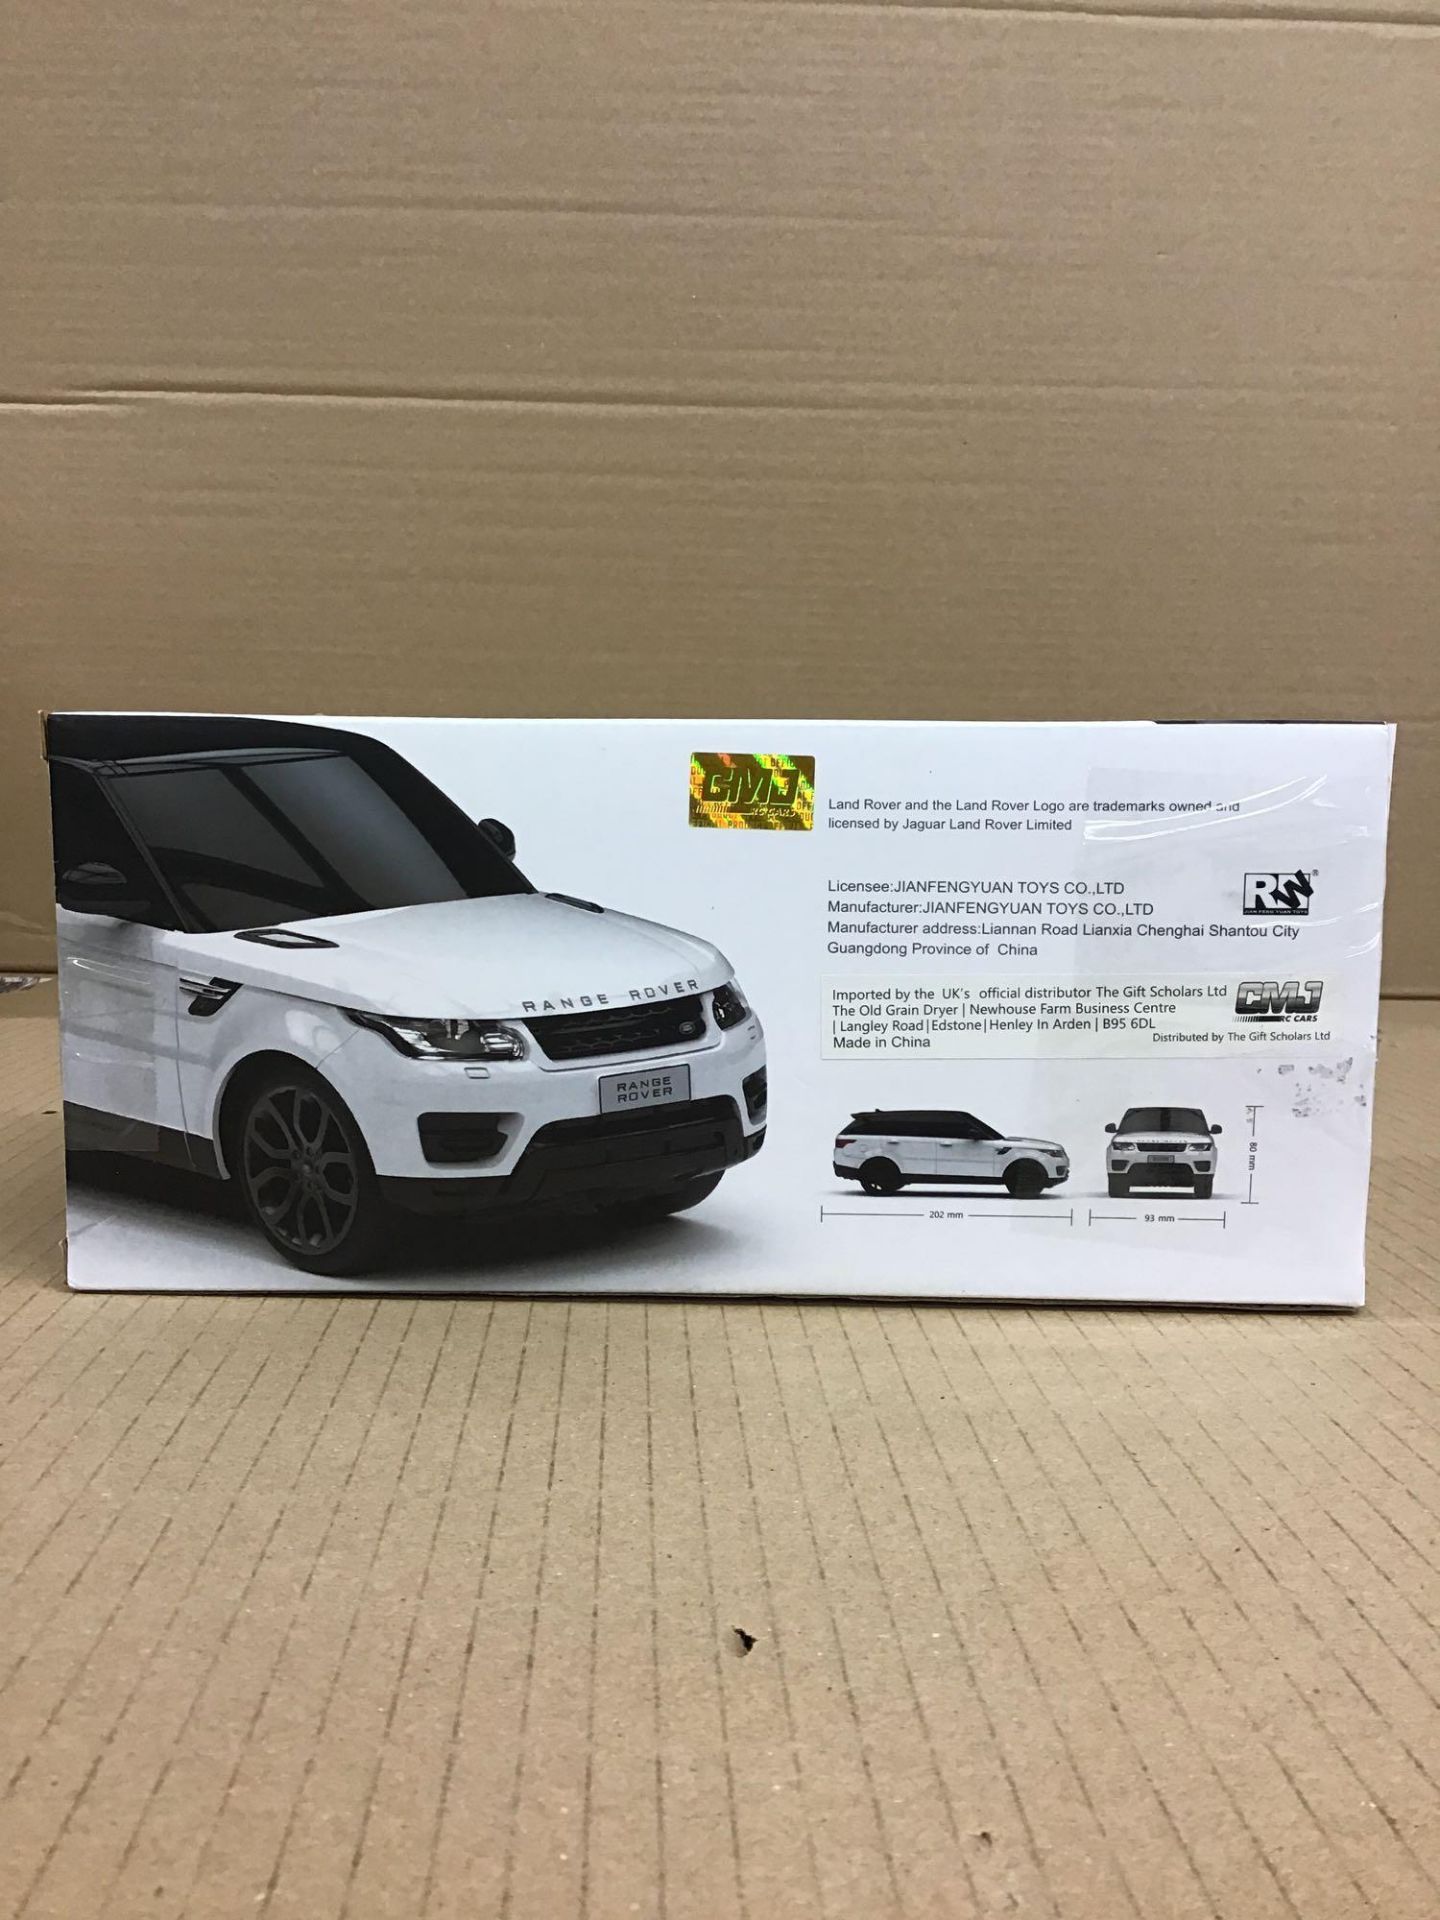 Radio Controlled Range Rover 1:24 Scale - White 2.4GHZ (886/3232) - £11.00 RRP - Image 2 of 5